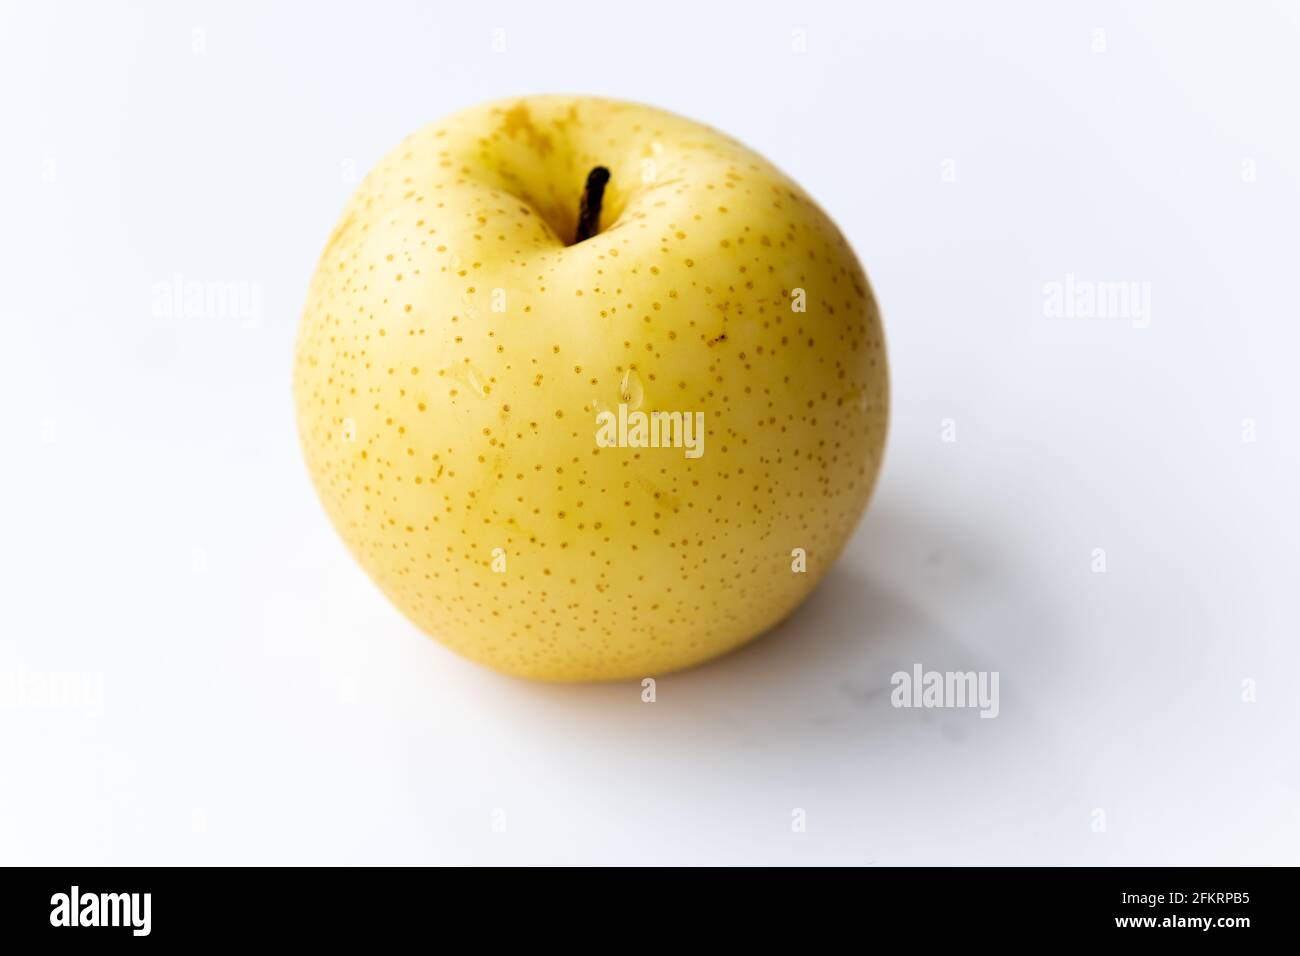 A Korean pear isolated on a white background. Stock Photo